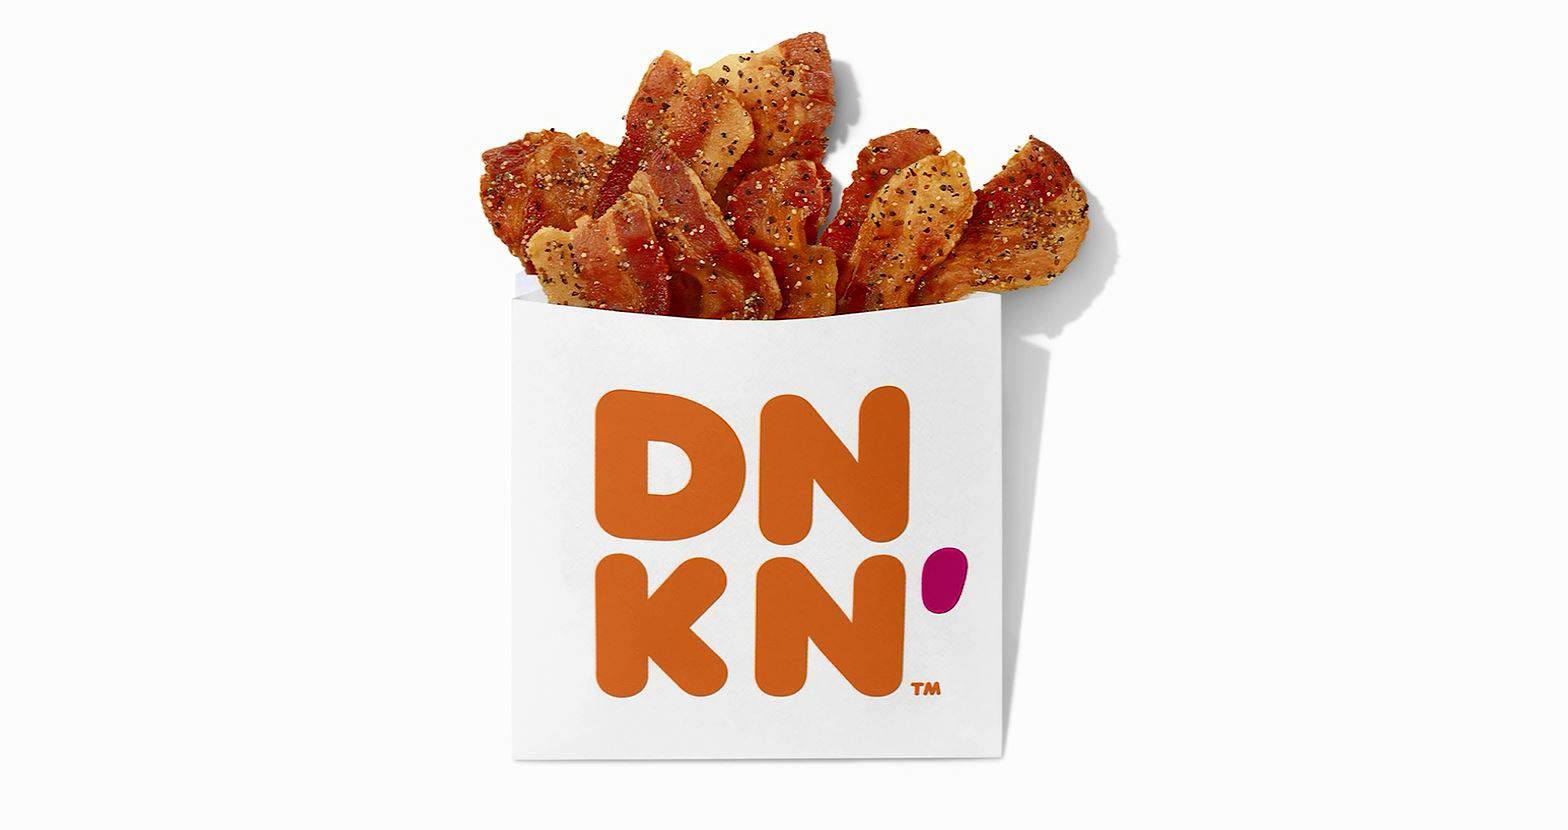 Dunkin’ now sells bags of bacon to snack on